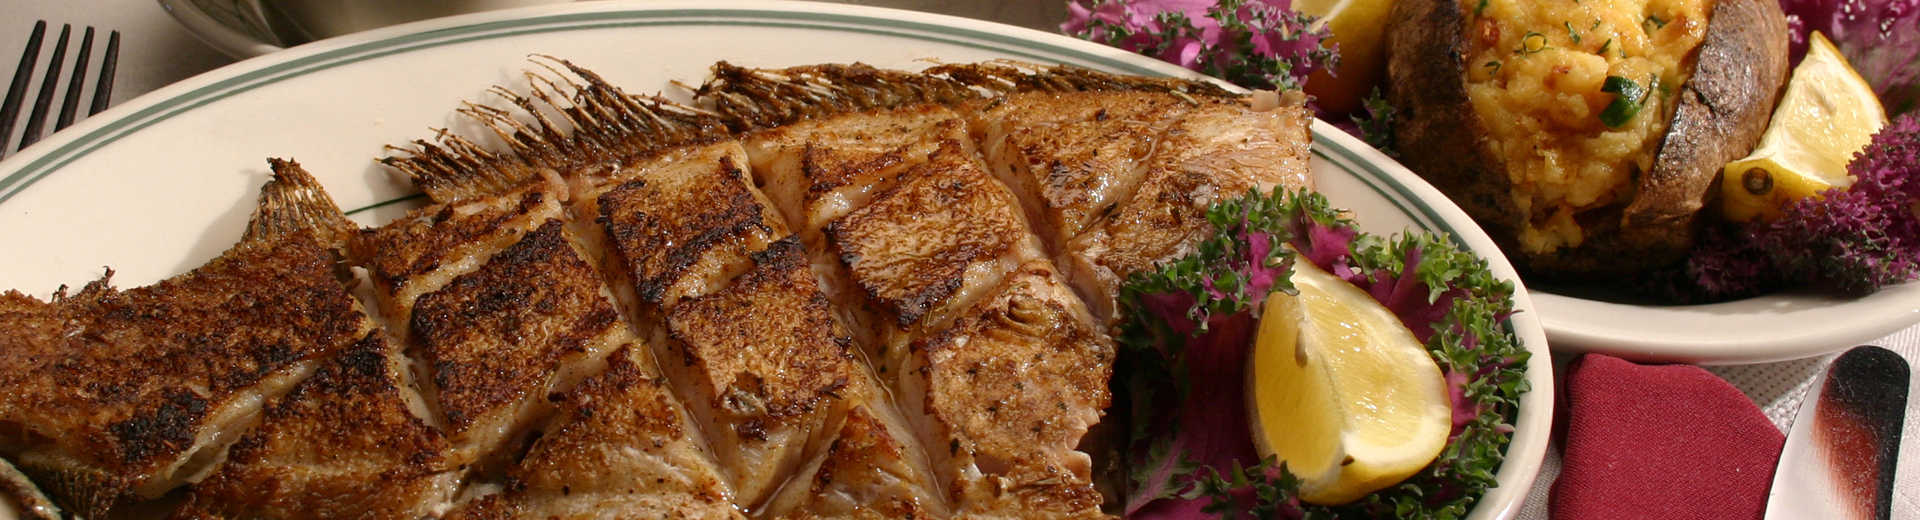 image of a grilled flounder seafood dish - Seafood Image